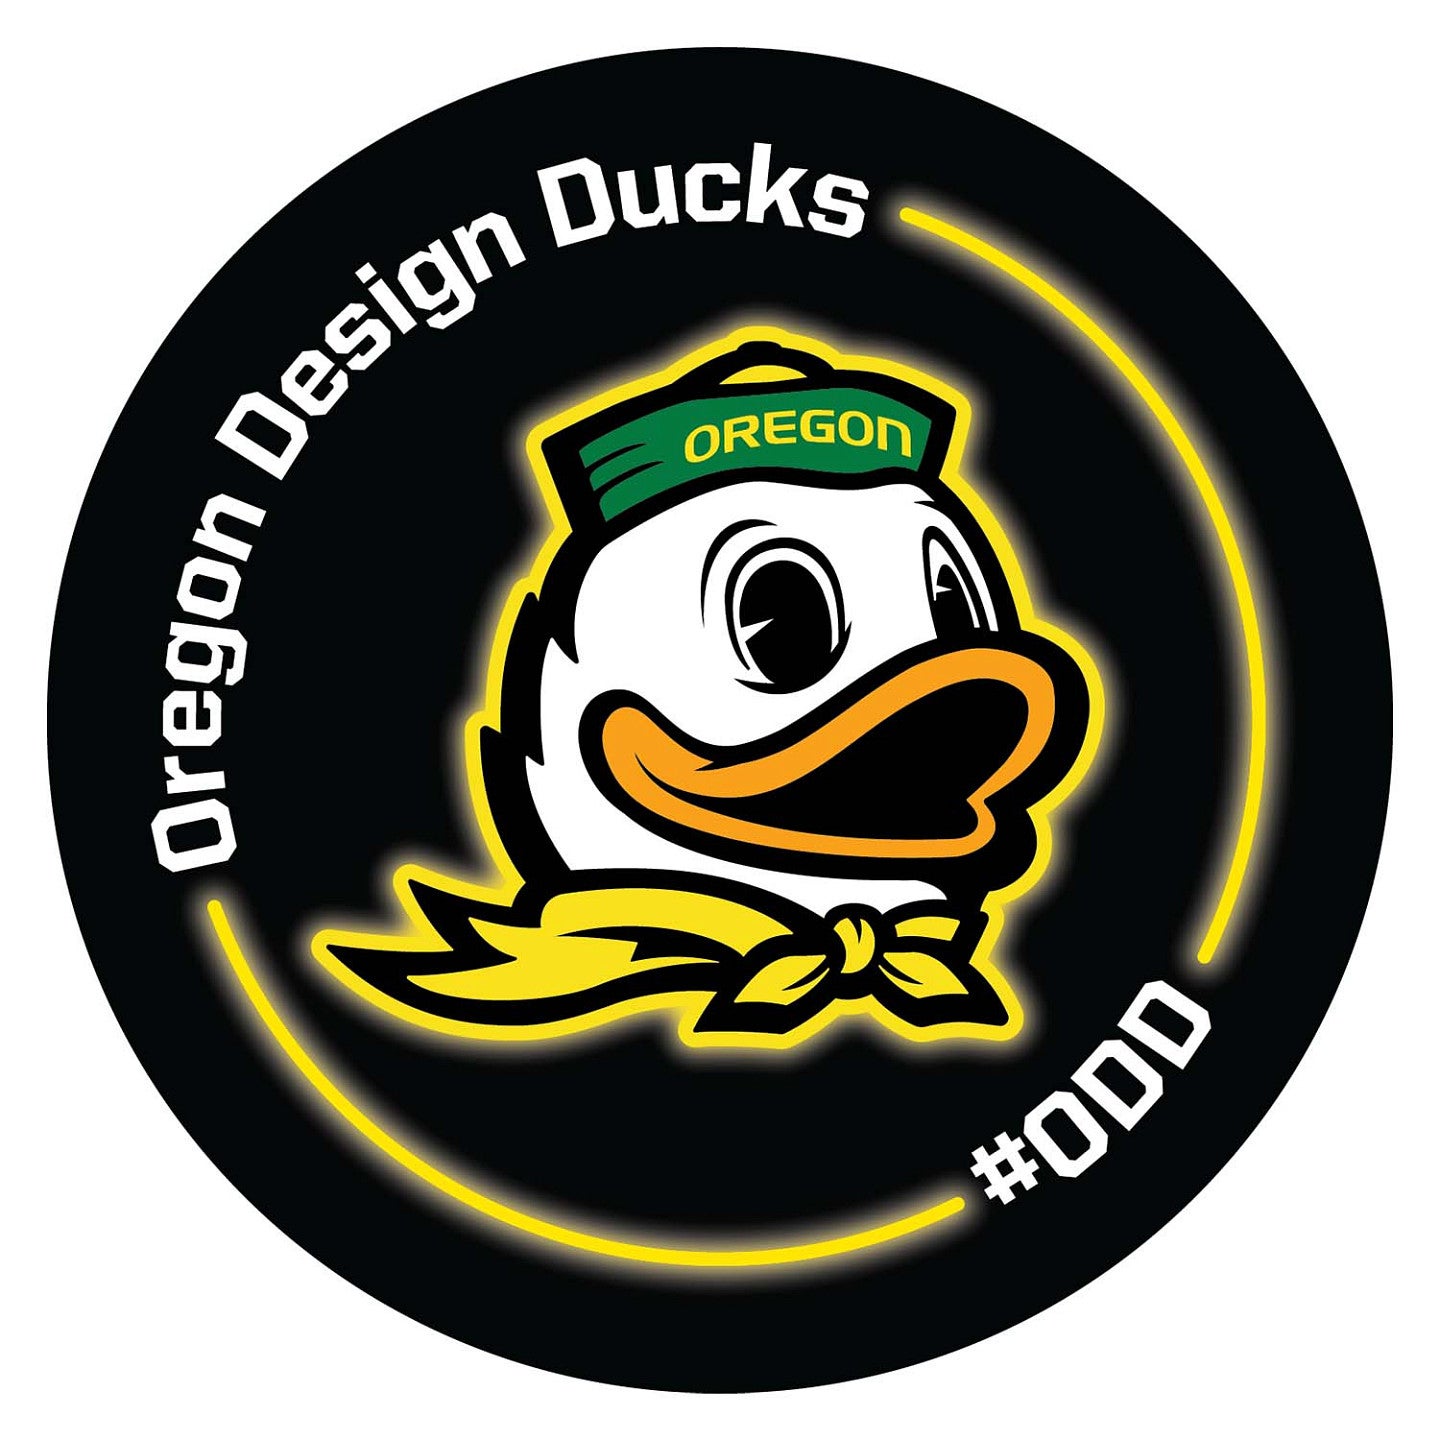 Full color sticker. Shows Duck logo with text "Oregon Design Ducks" and "#ODD"